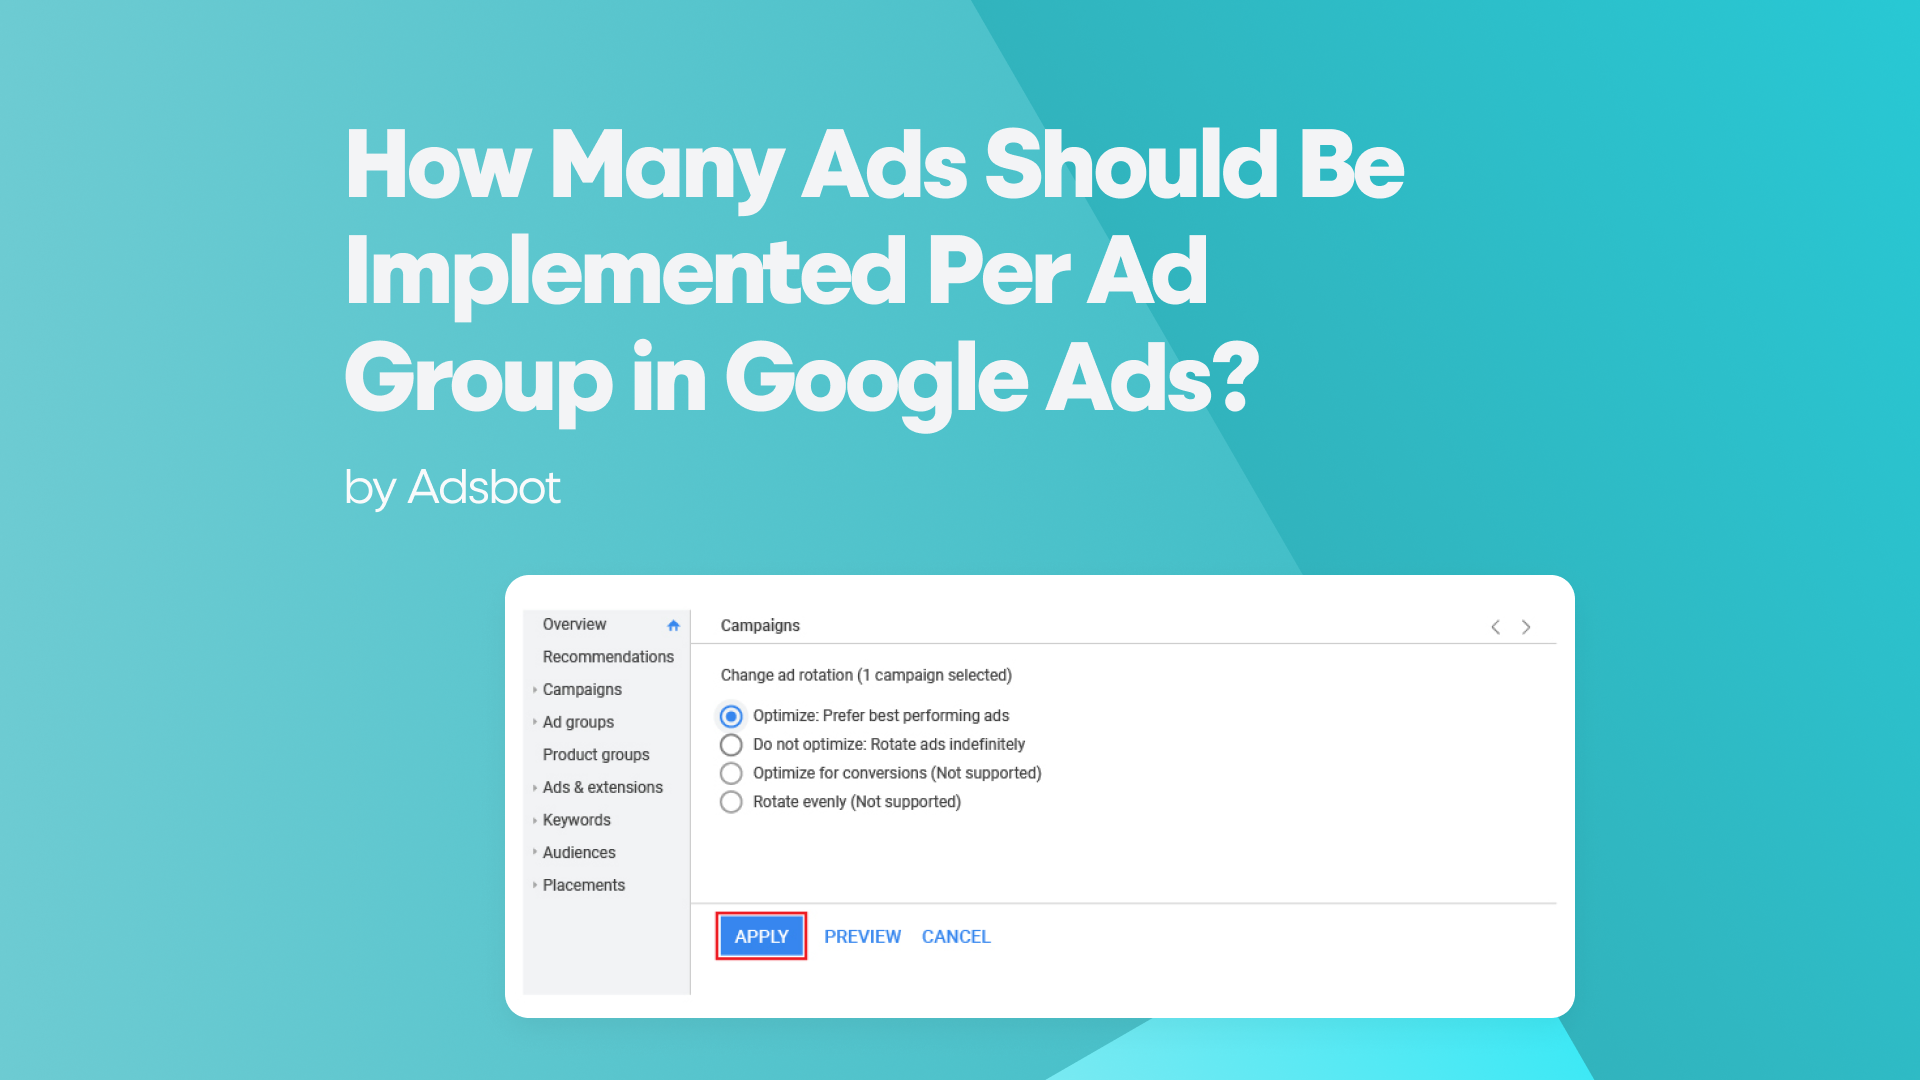 How Many Ads Should Be Implemented Per Ad Group in Google Ads?